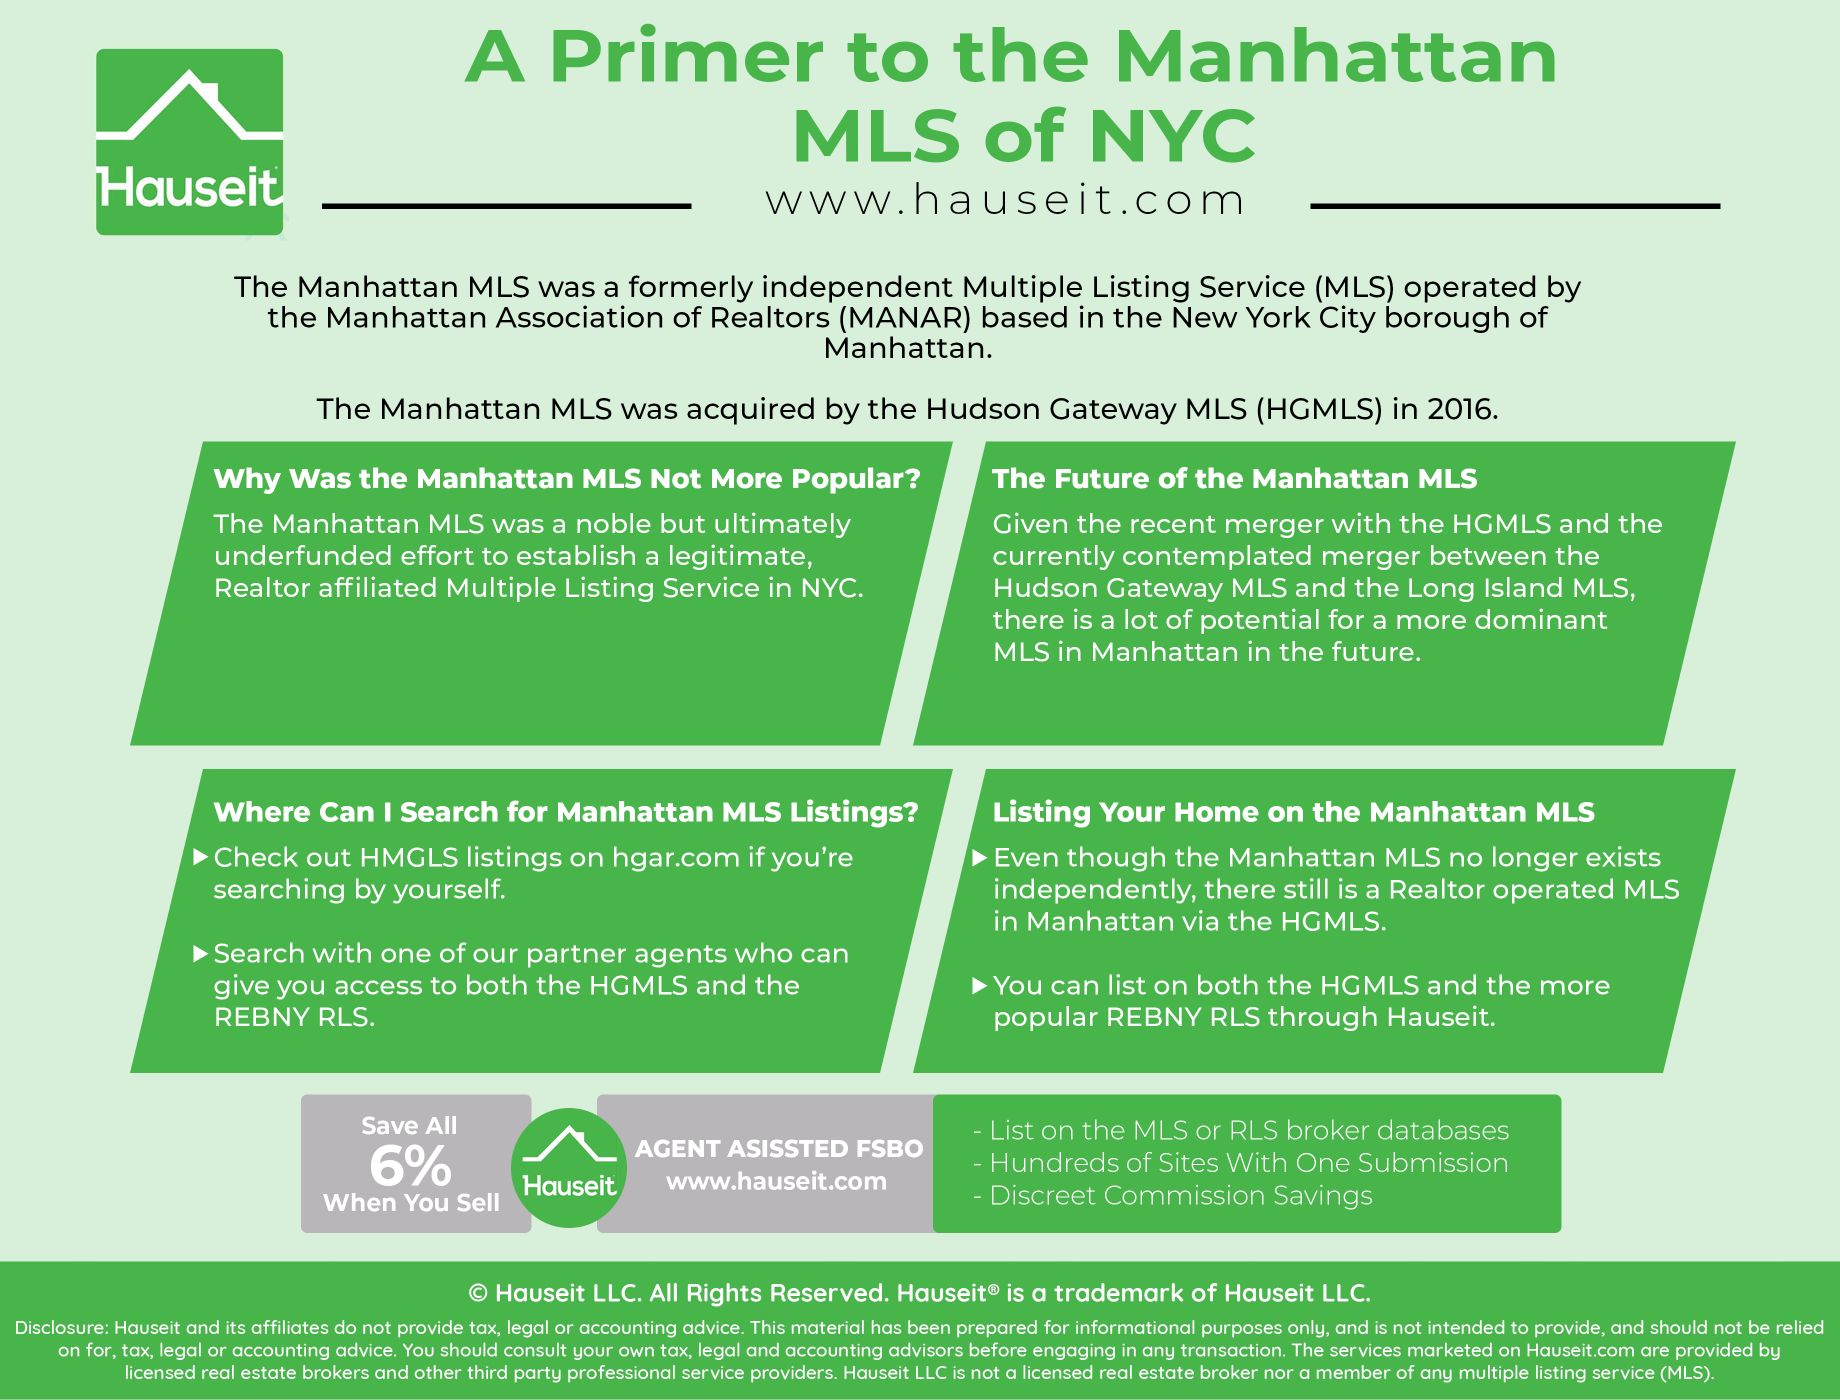 The Manhattan MLS was a formerly independent Multiple Listing Service (MLS) operated by the Manhattan Association of Realtors (MANAR) based in the New York City borough of Manhattan.